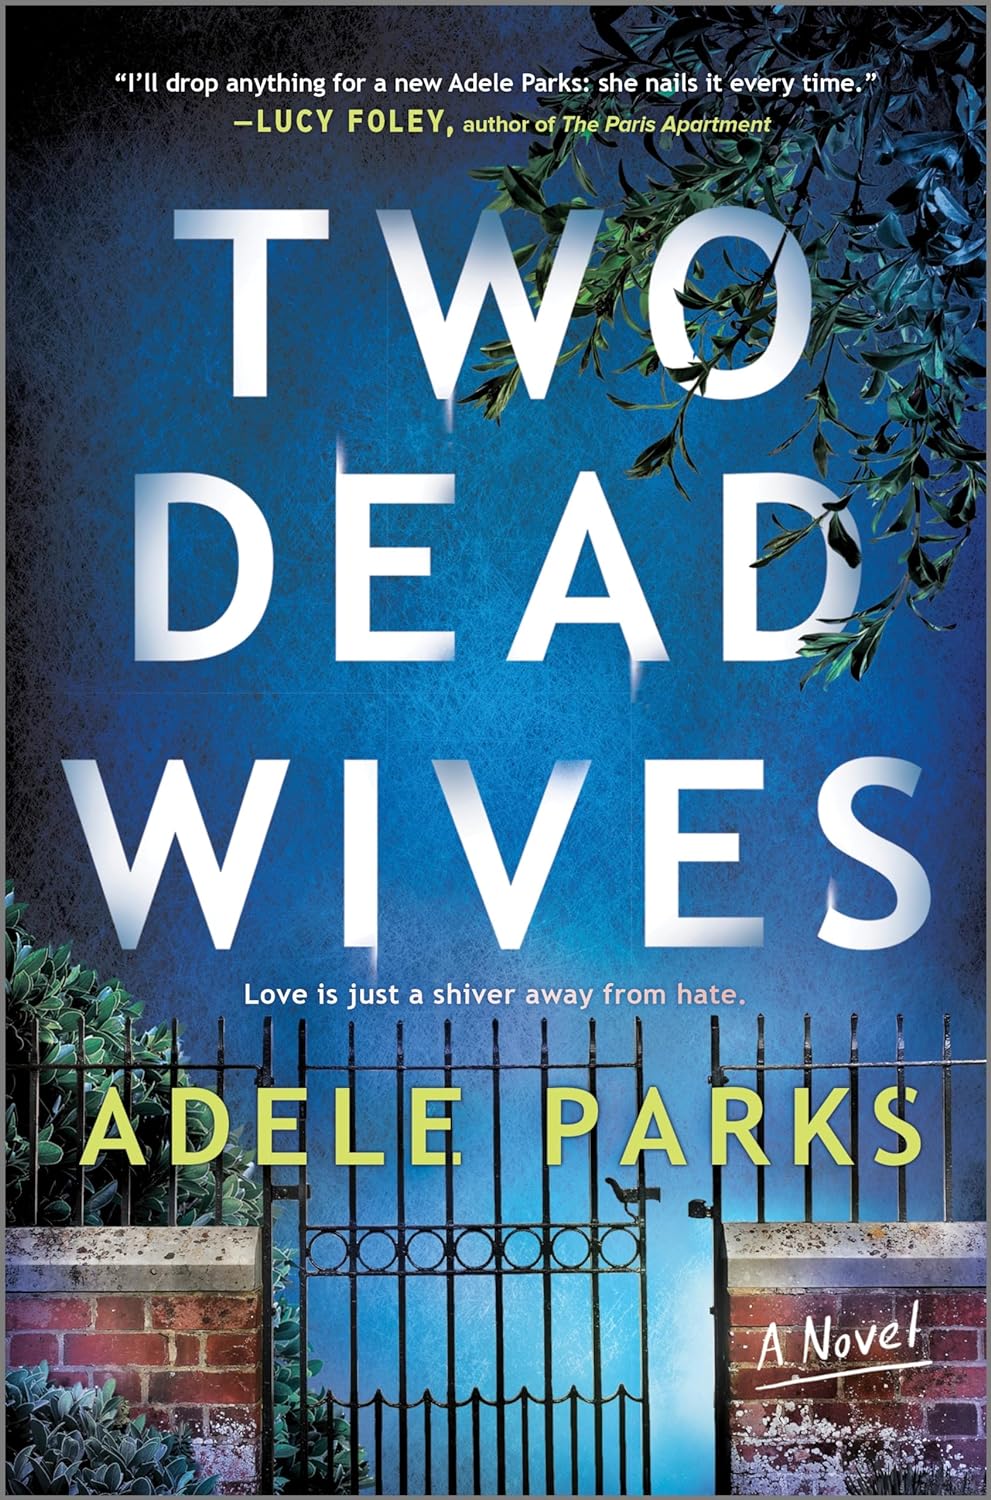 Image for "Two Dead Wives"